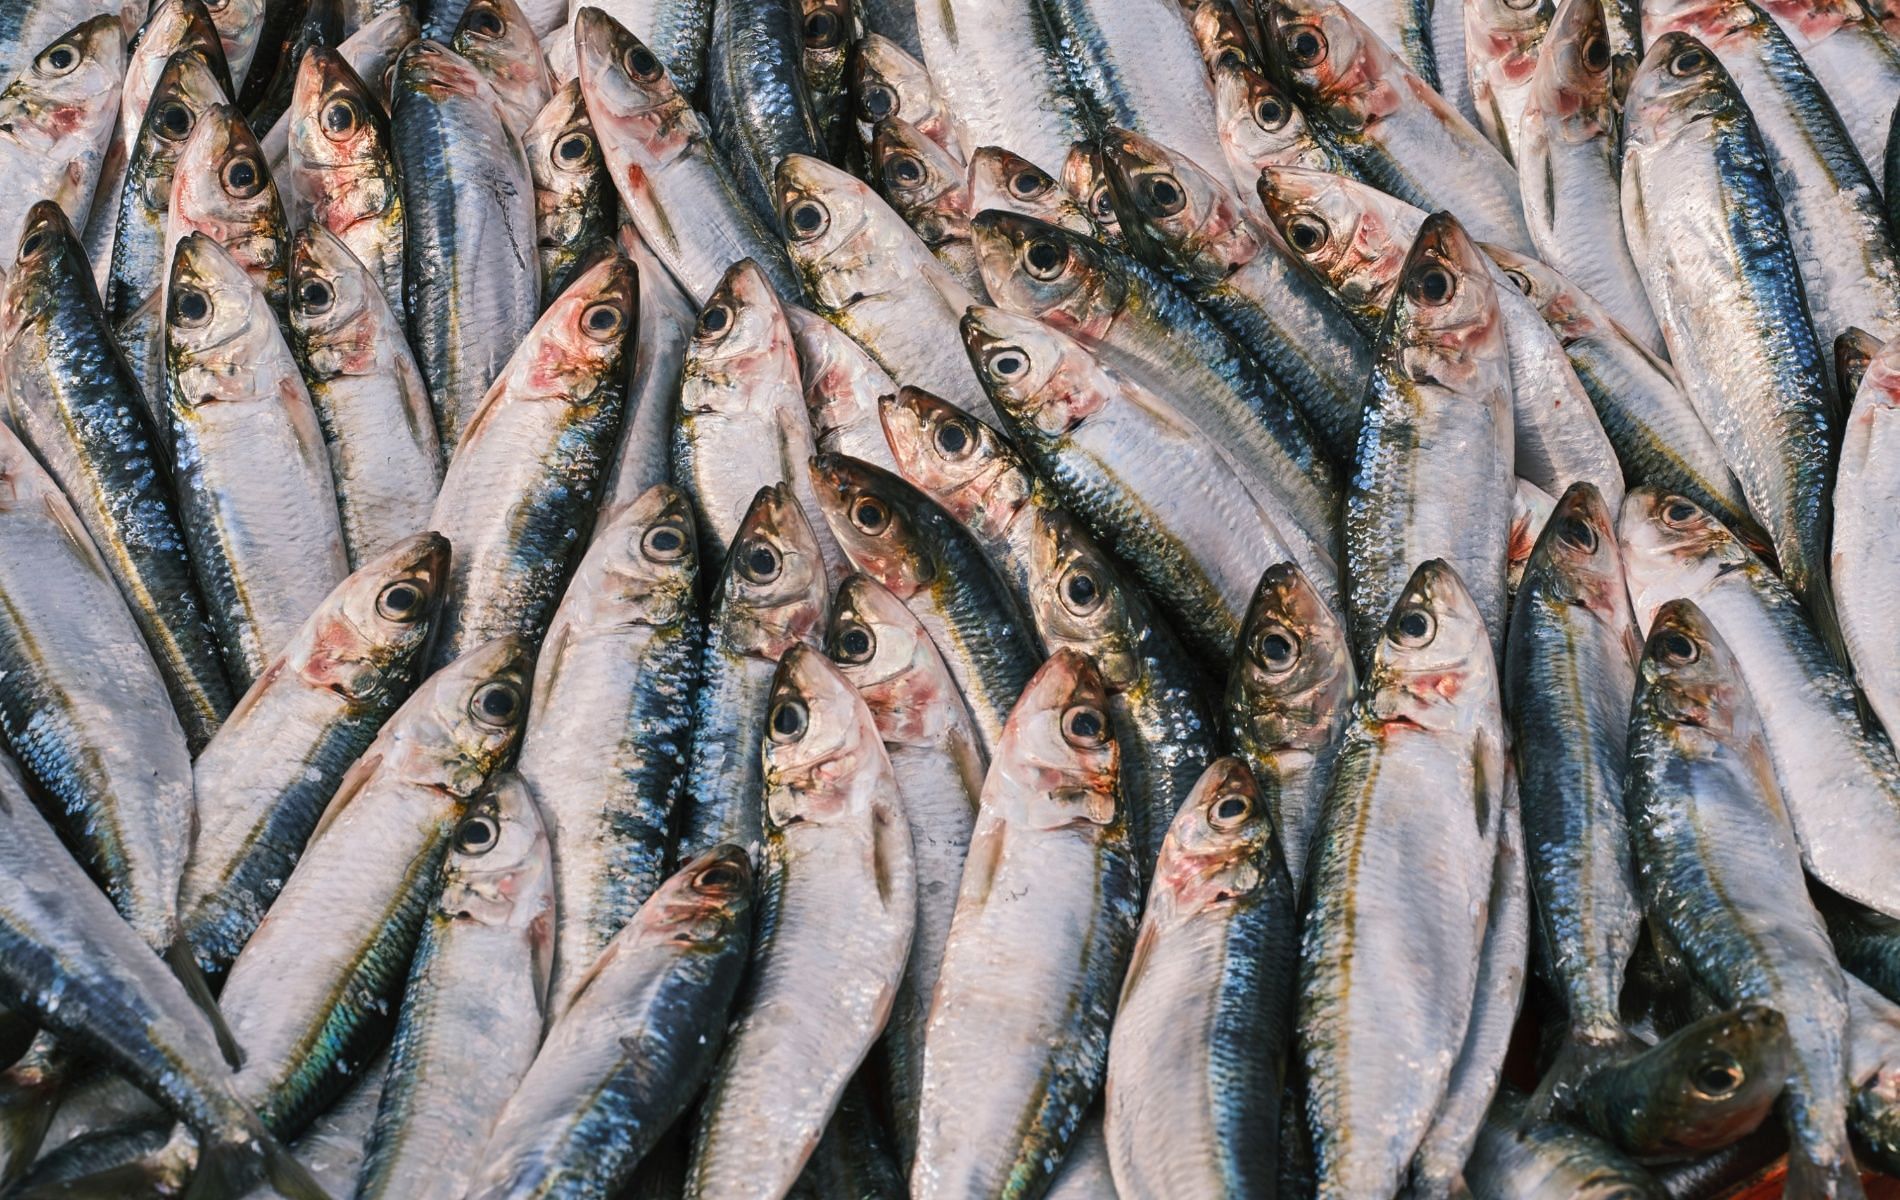 Sardine is a widely consumed oily fish (Image by Engin Akyurt via Pexels)